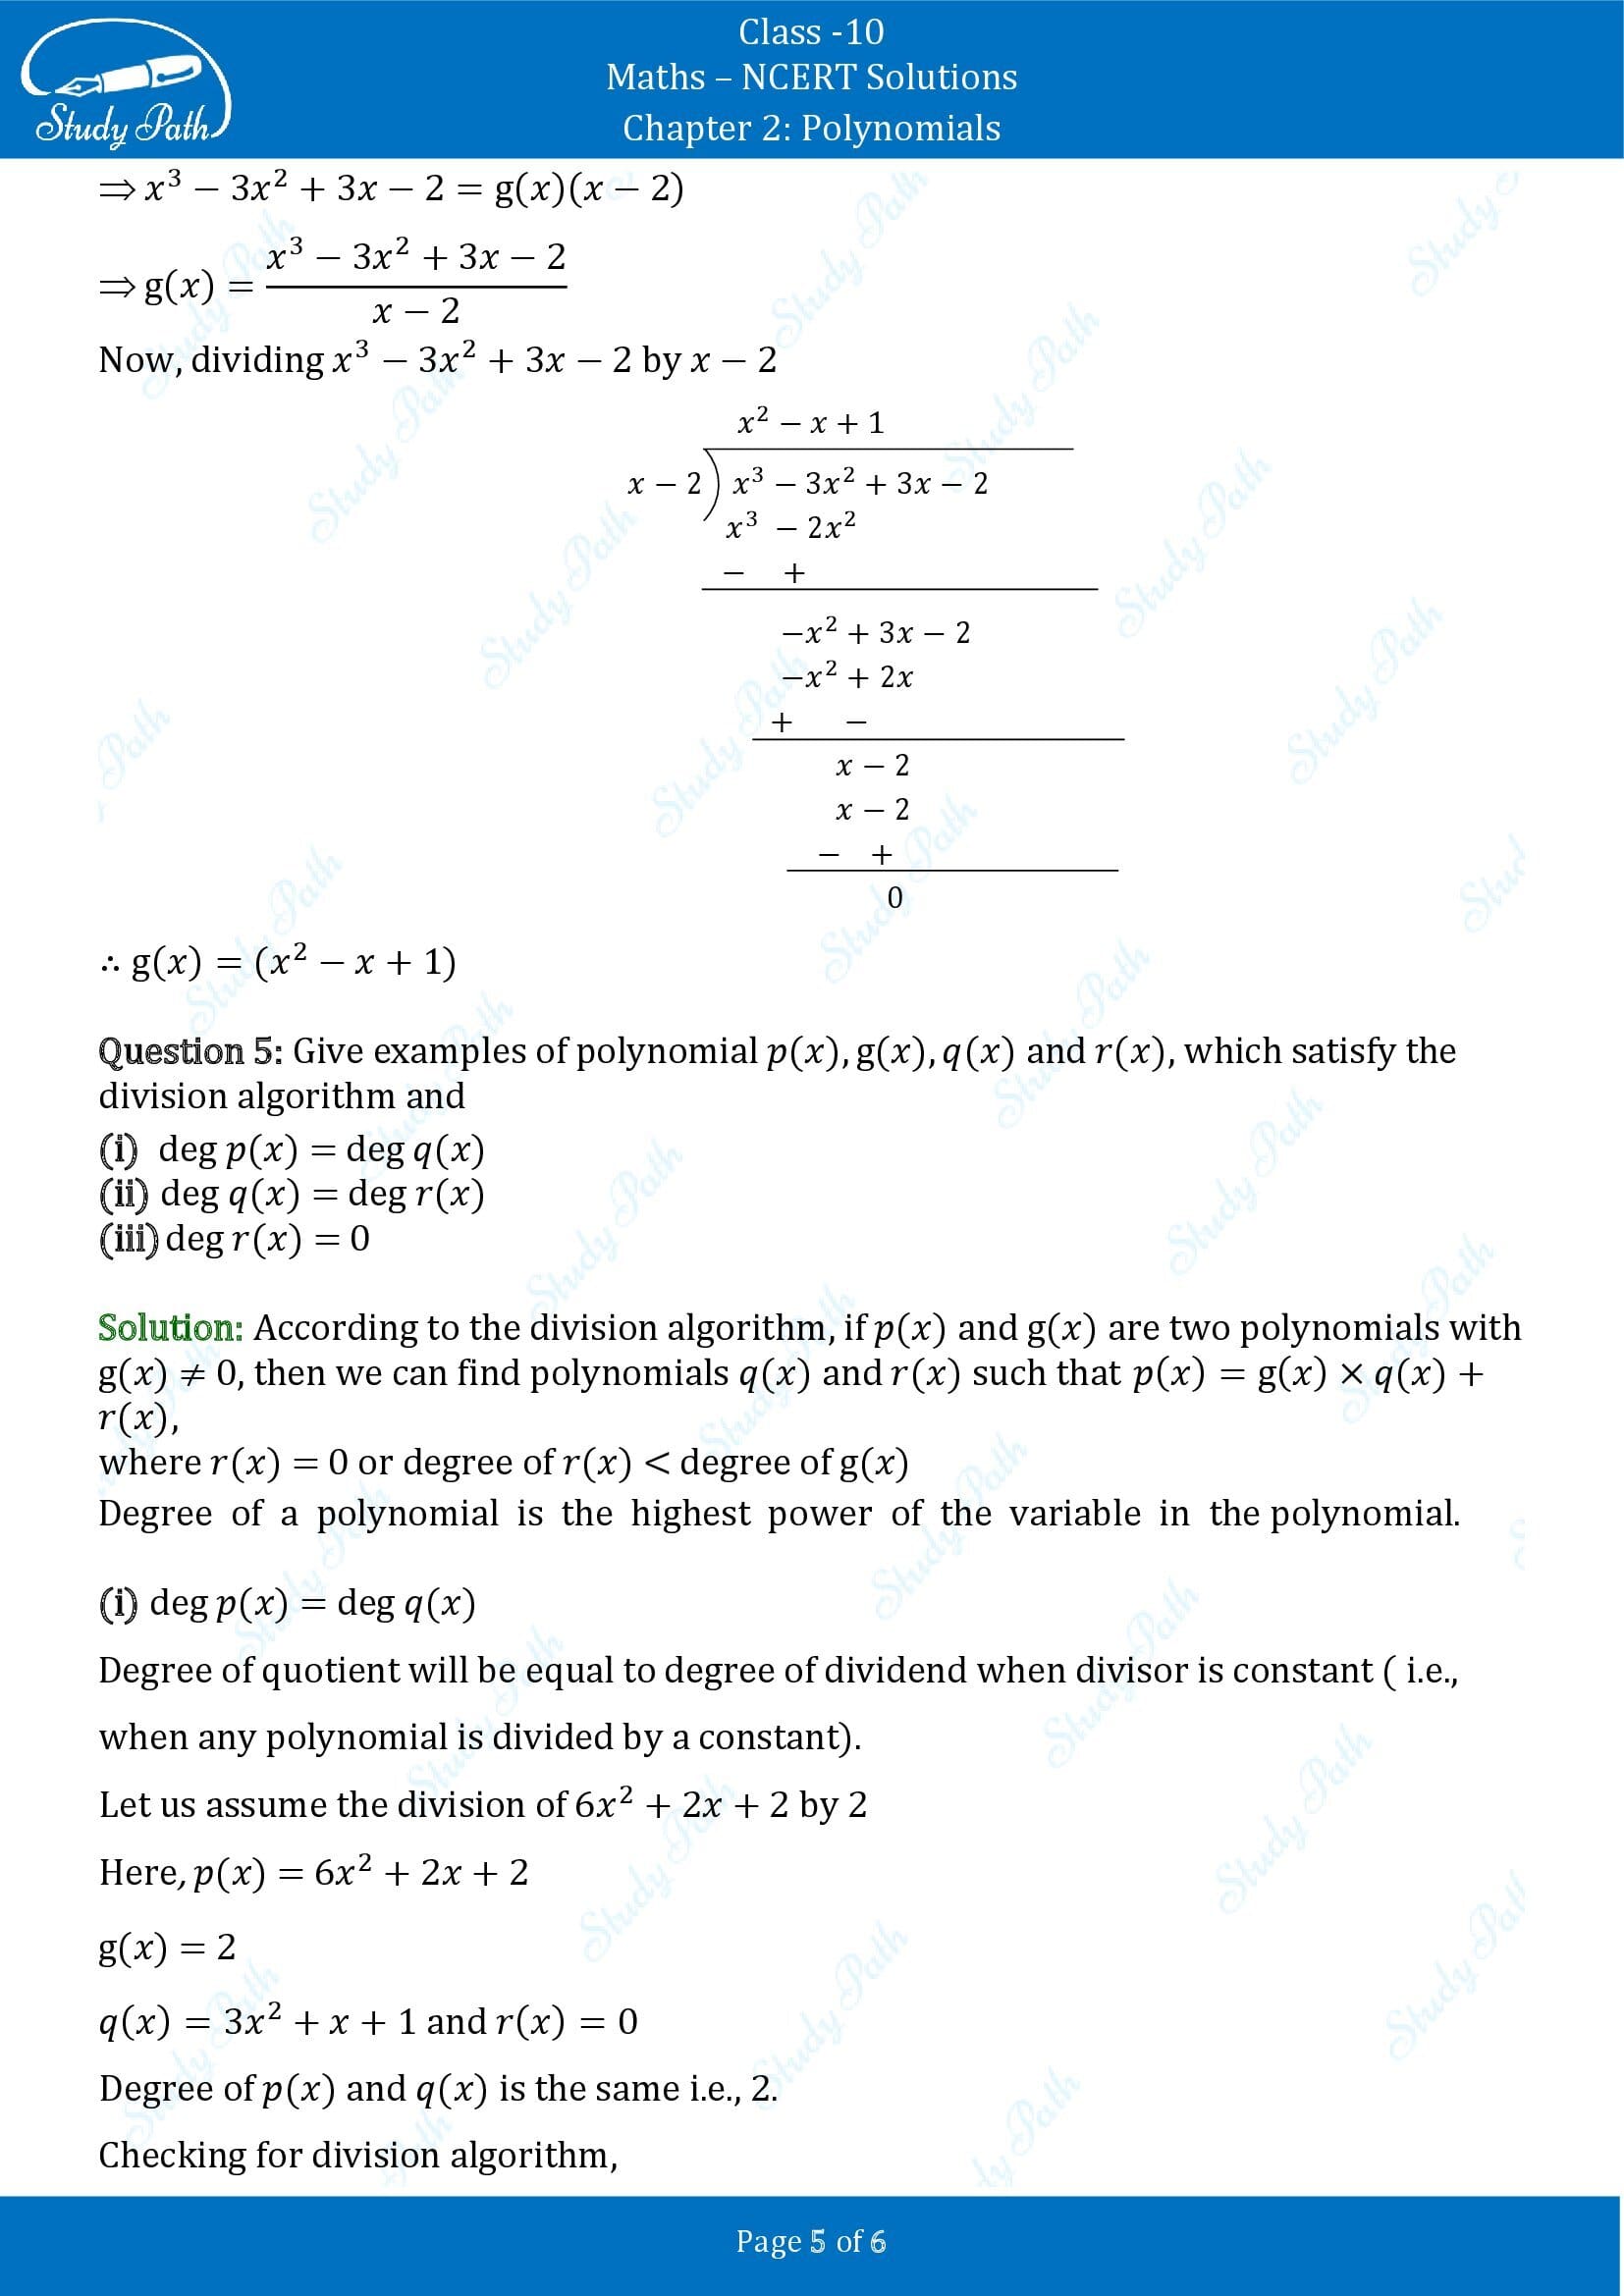 NCERT Solutions for Class 10 Maths Chapter 2 Polynomials Exercise 2.3 00005